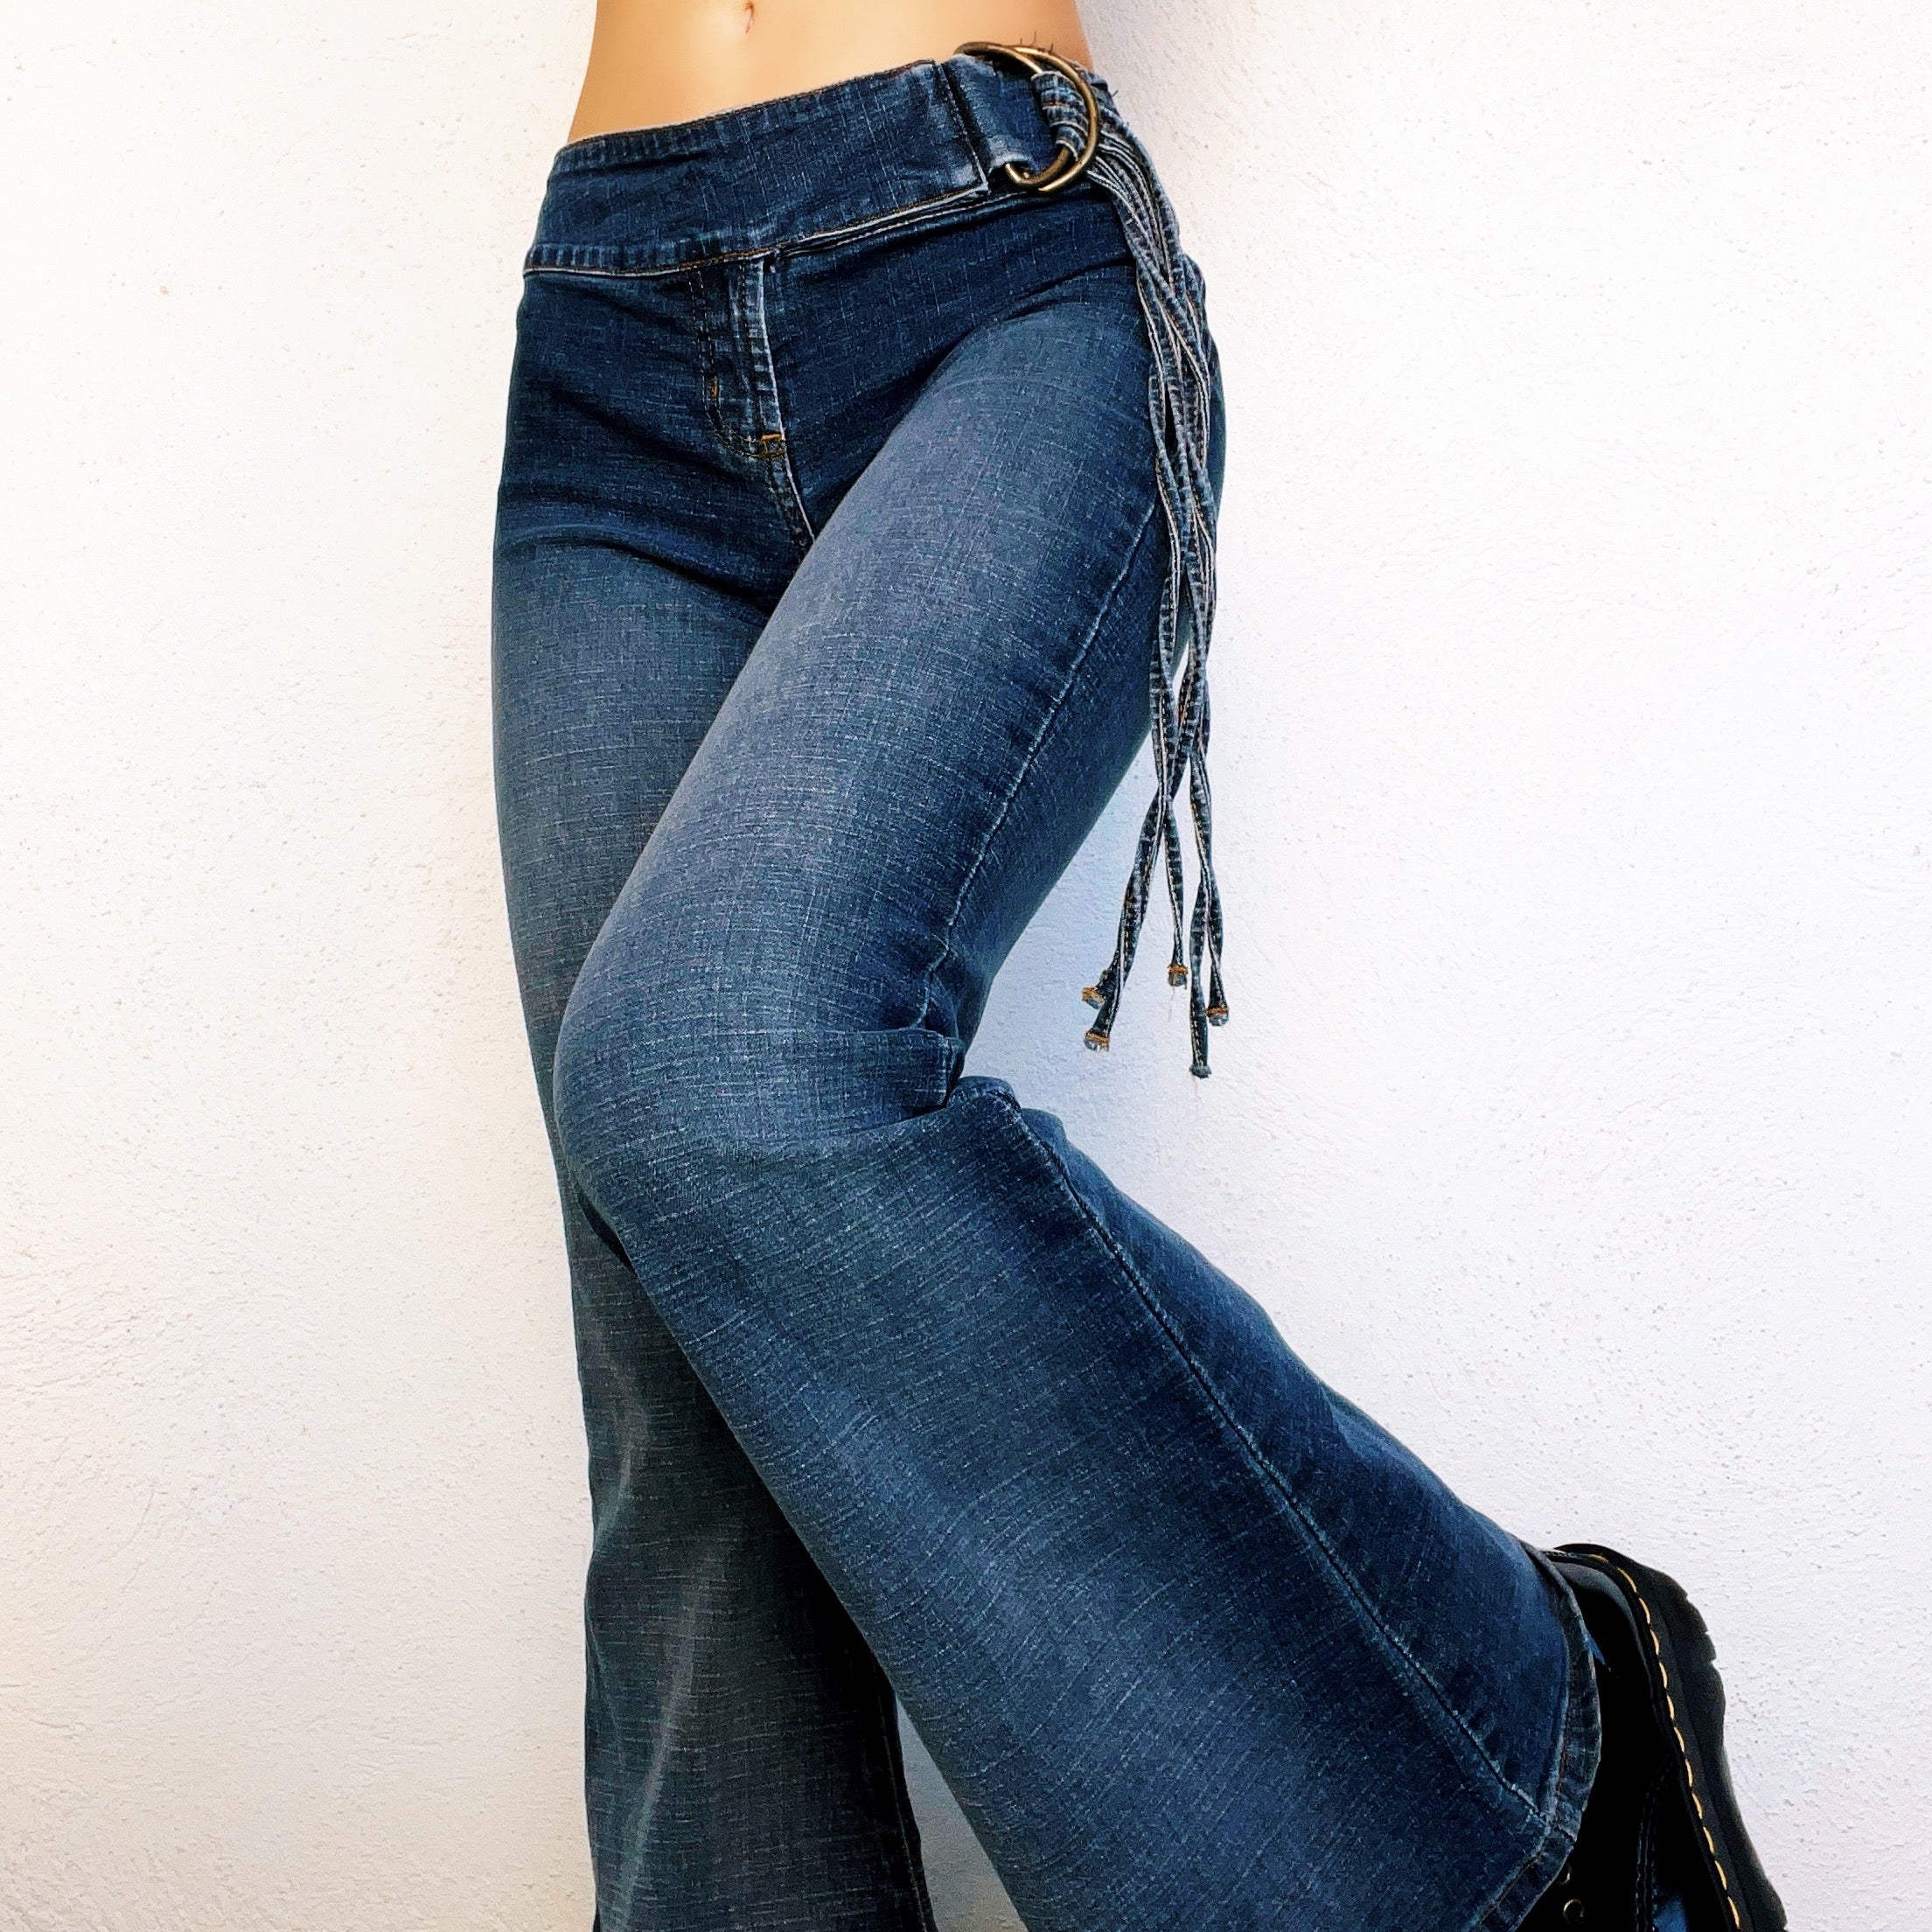 90s Fringy Flare Jeans (M)